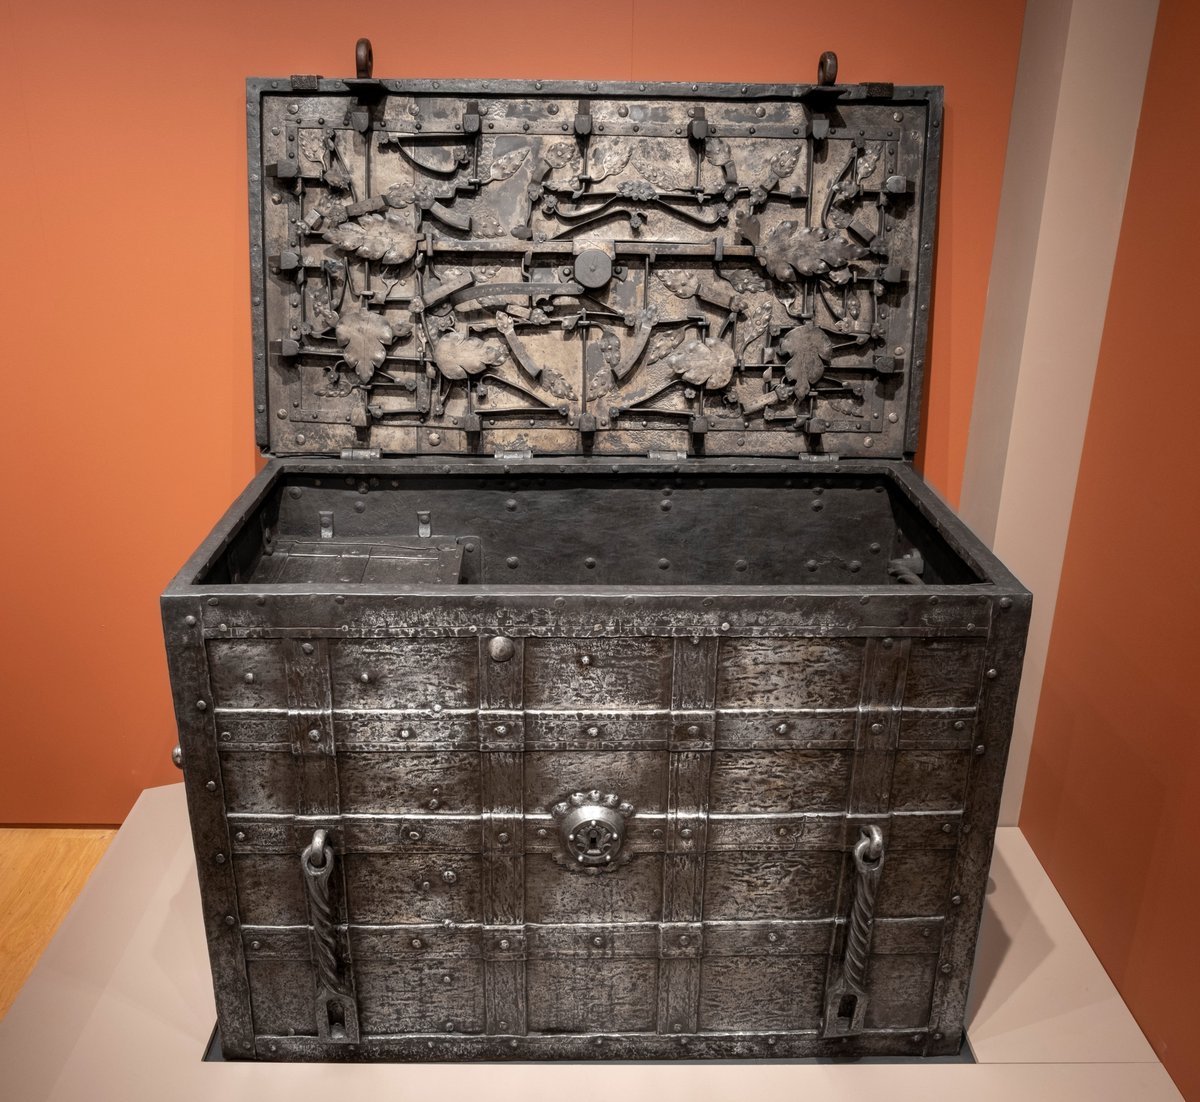 At nearly 800 lbs, this strongbox would have been nearly impossible for thieves to cart away! This one has an advanced security system, with nine bolts and various leaf-shaped shields operated by a system of levers and springs.